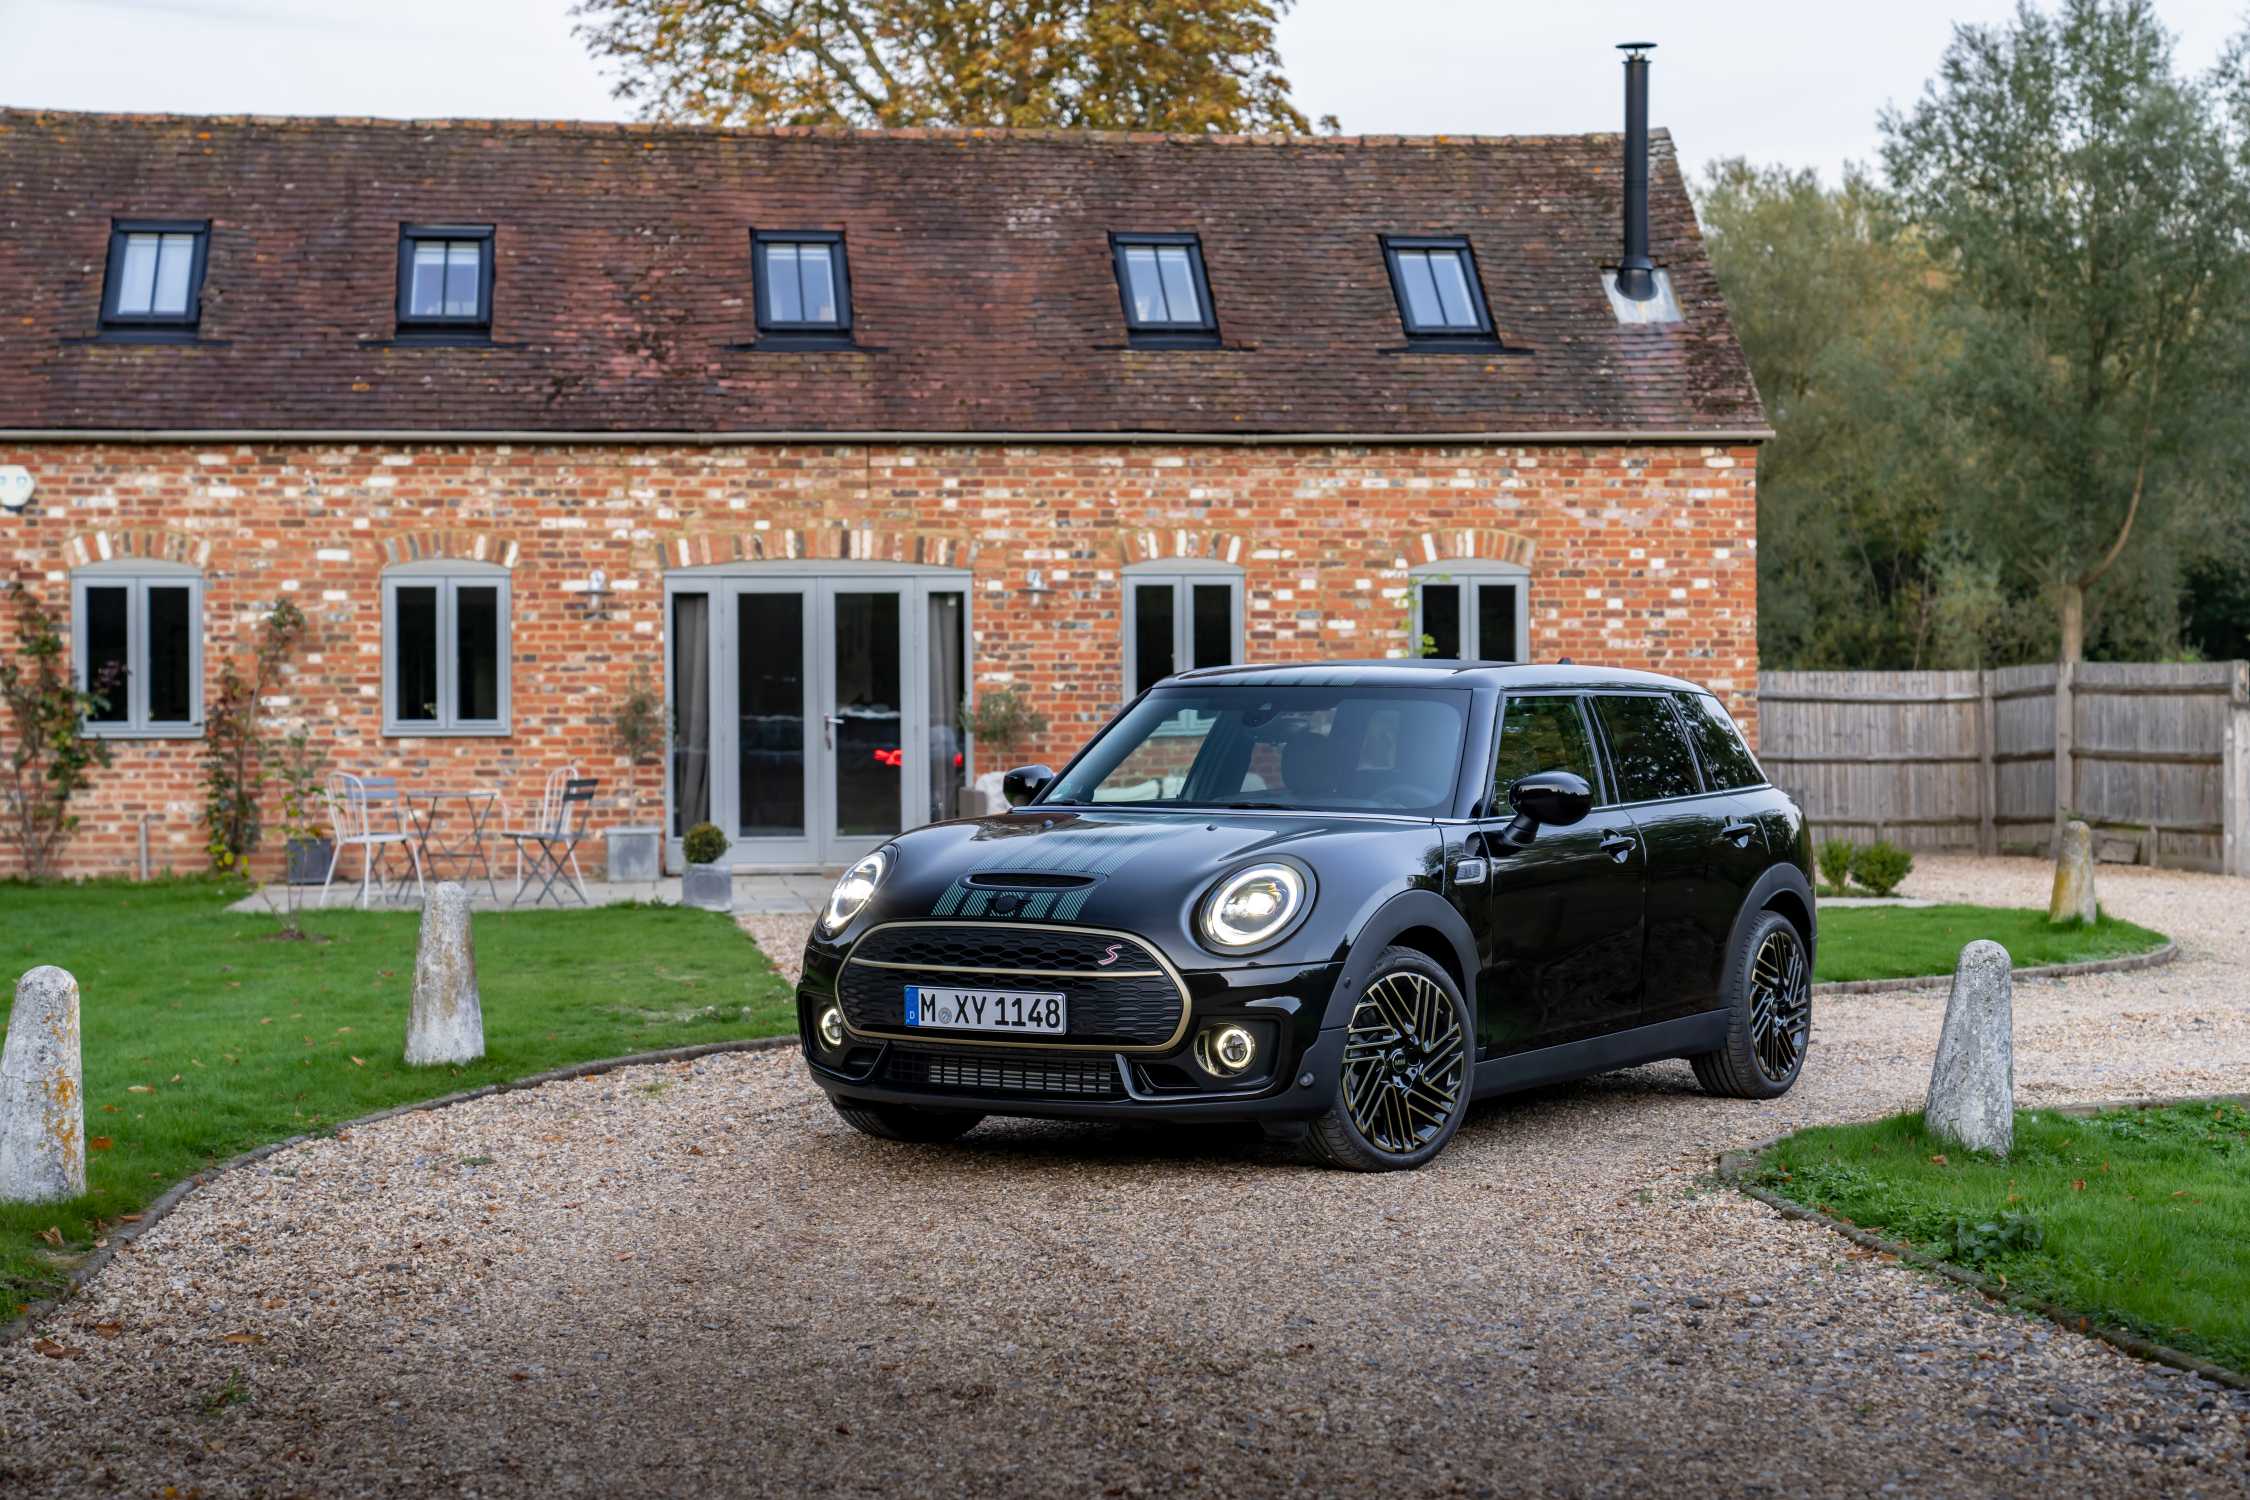 Exceptional talent with style The MINI Cooper S Clubman in the Untold